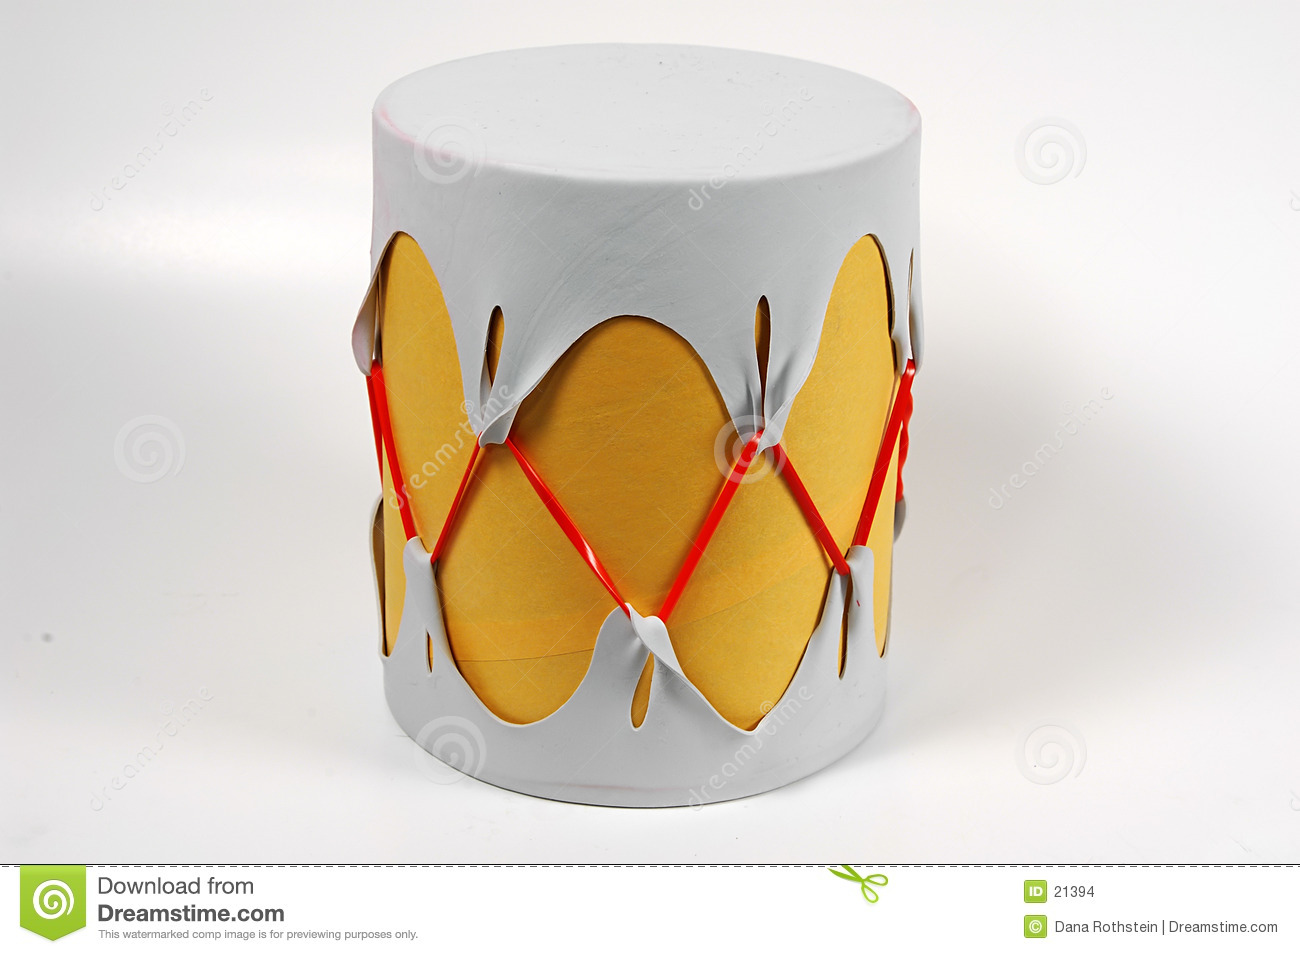 Toy Indian Drum Stock Images   Image  21394